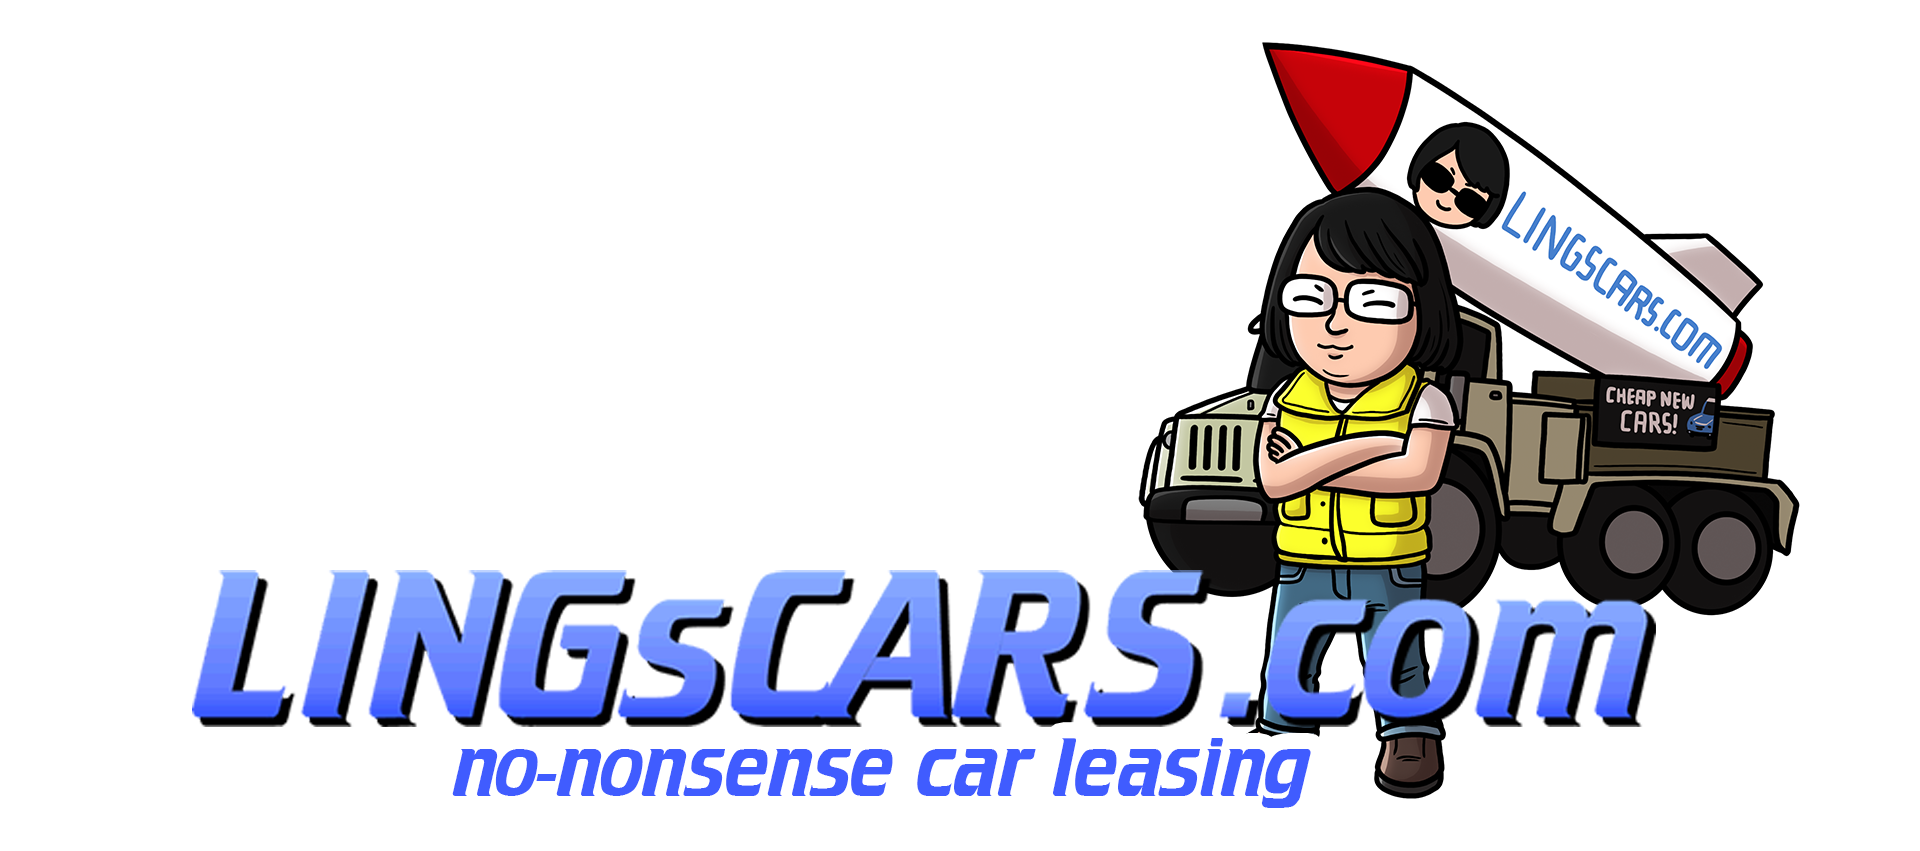 Cheap car leasing from LINGsCARS.com